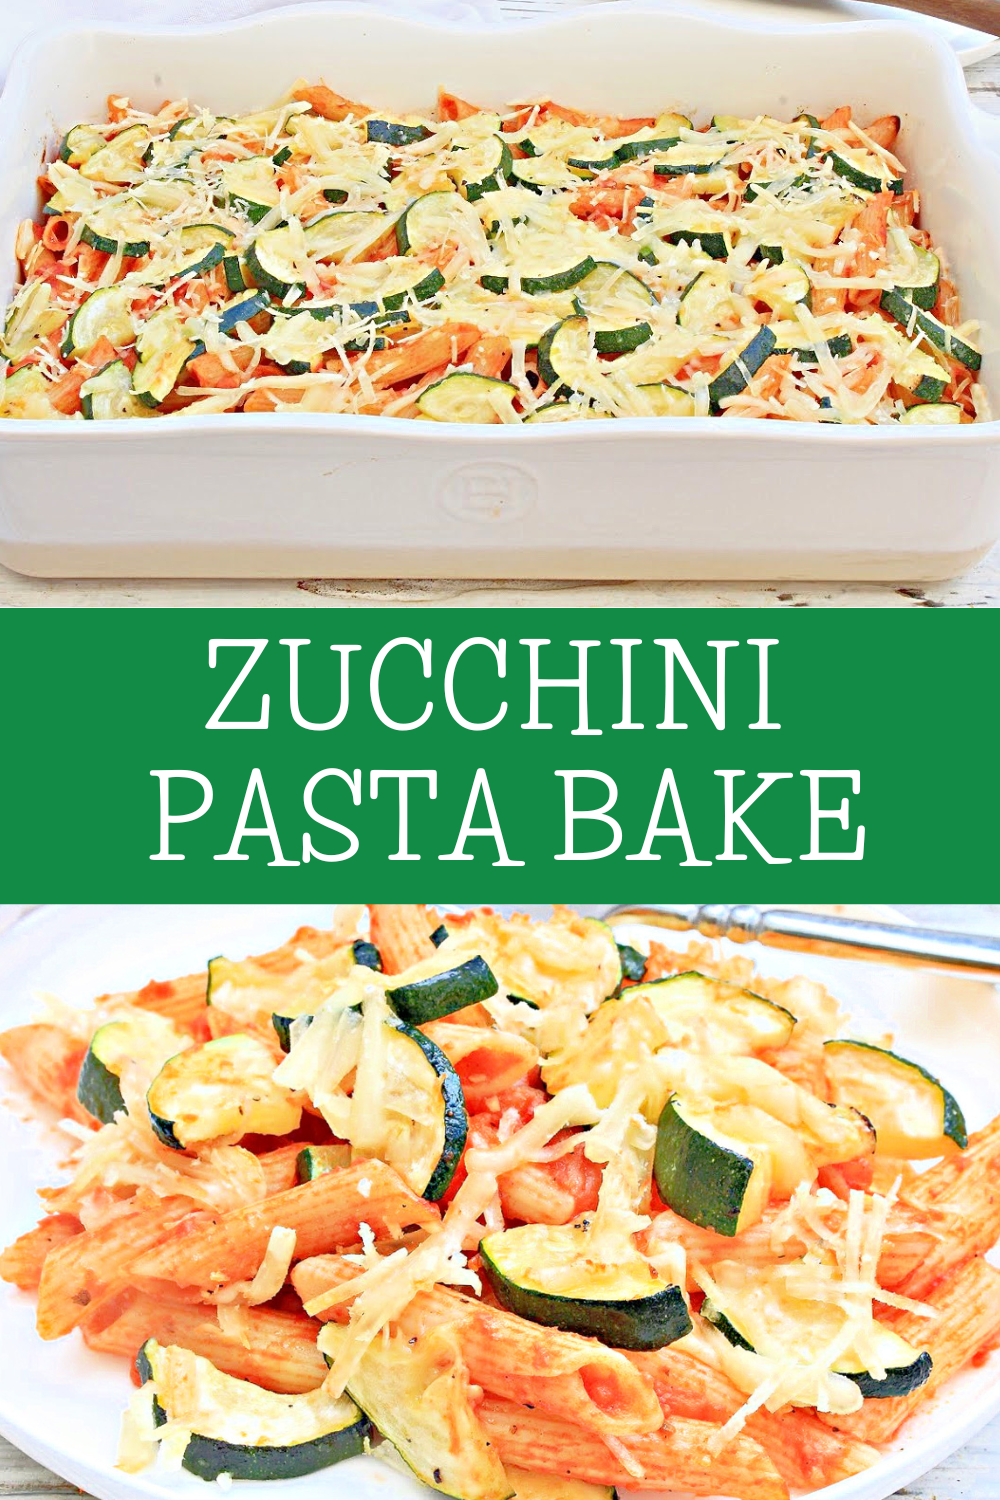 Zucchini Pasta Bake ~ This no-fuss comfort food casserole is perfect for busy weeknights or lazy Sunday dinner! via @thiswifecooks